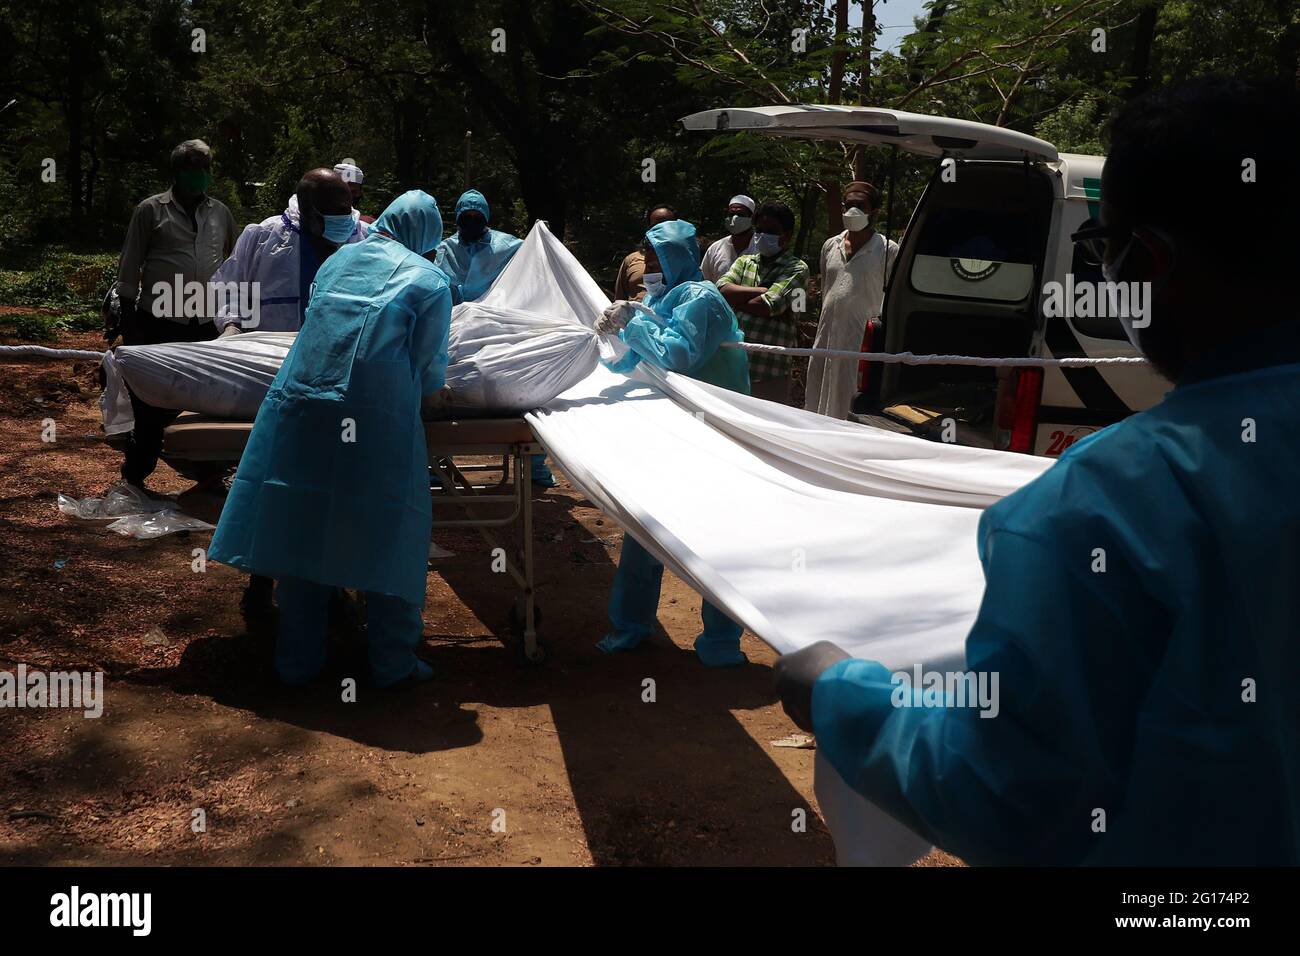 Chennai, India. 05th June, 2021. Volunteers along with graveyard workers wearing protective gear prepare to bury the body of a man who died of Covid-19 corona virus in a burial pit in Chennai. (Photo by Sri Loganathan Velmurugan/Pacific Press) Credit: Pacific Press Media Production Corp./Alamy Live News Stock Photo